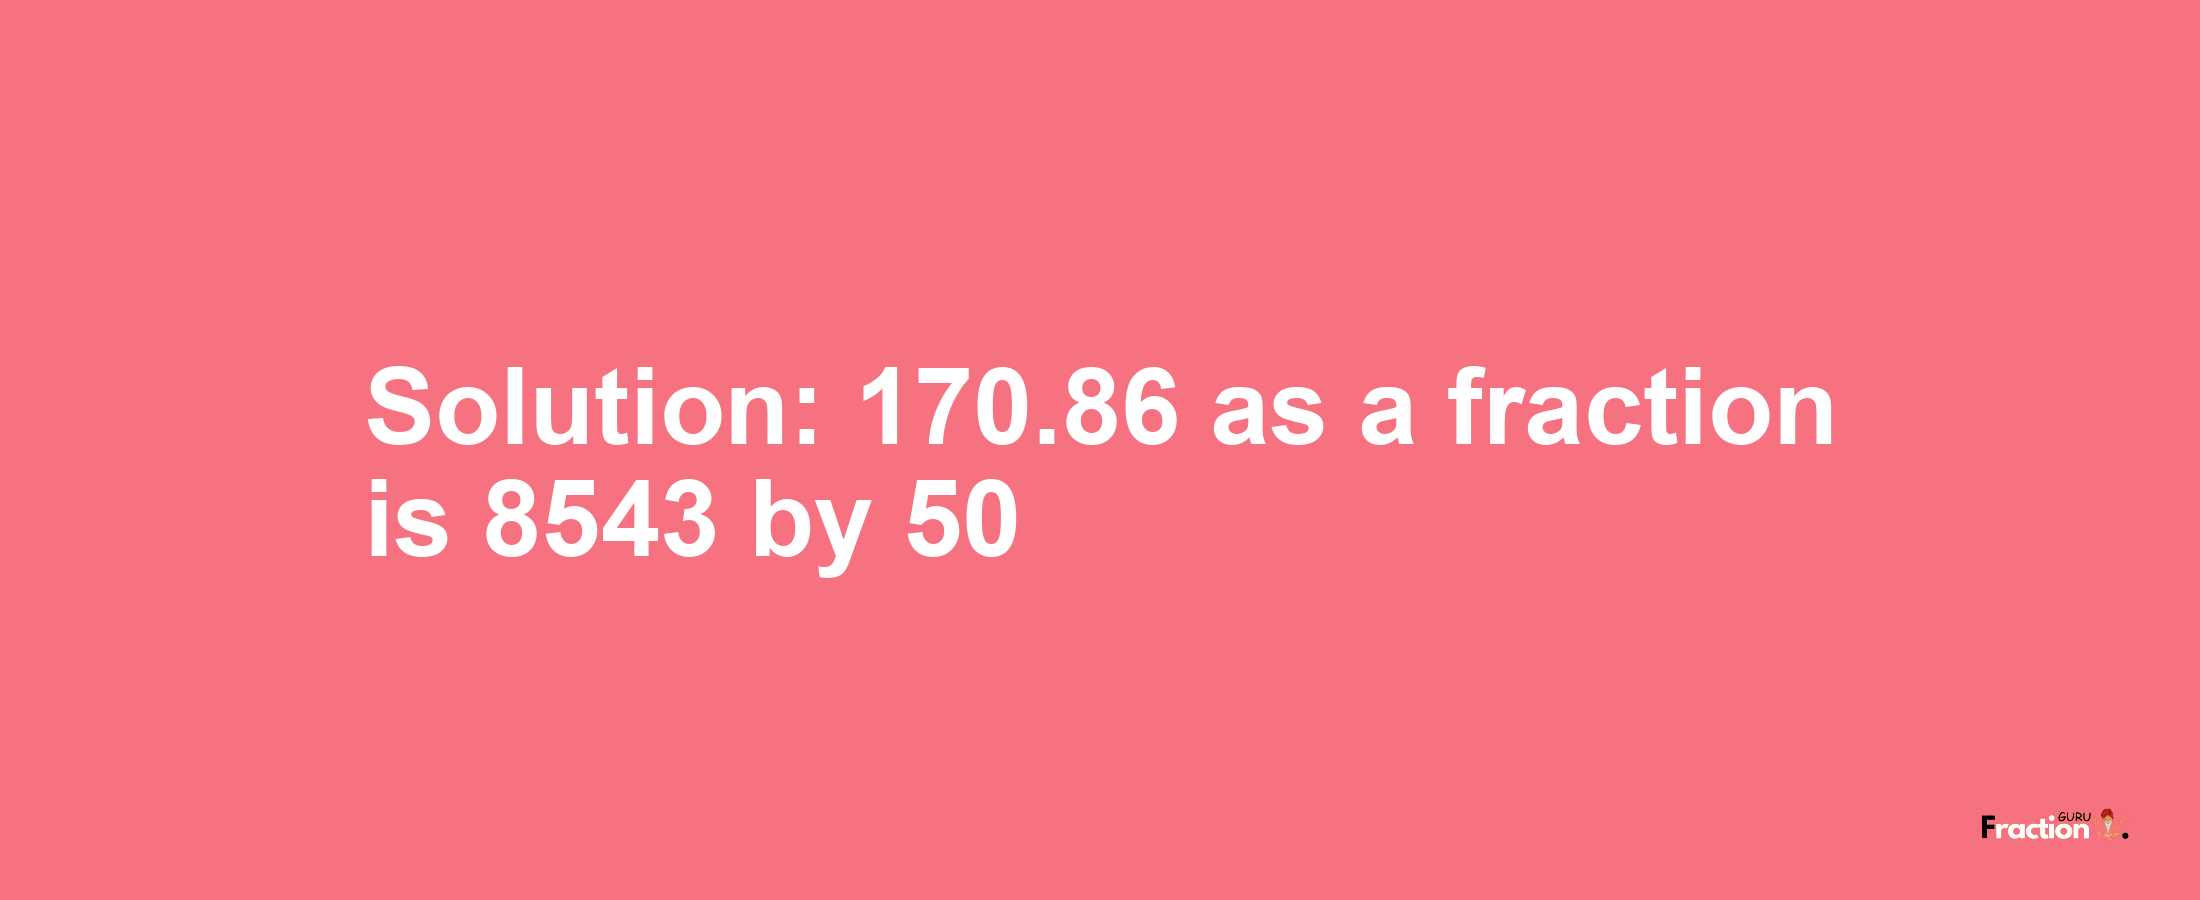 Solution:170.86 as a fraction is 8543/50